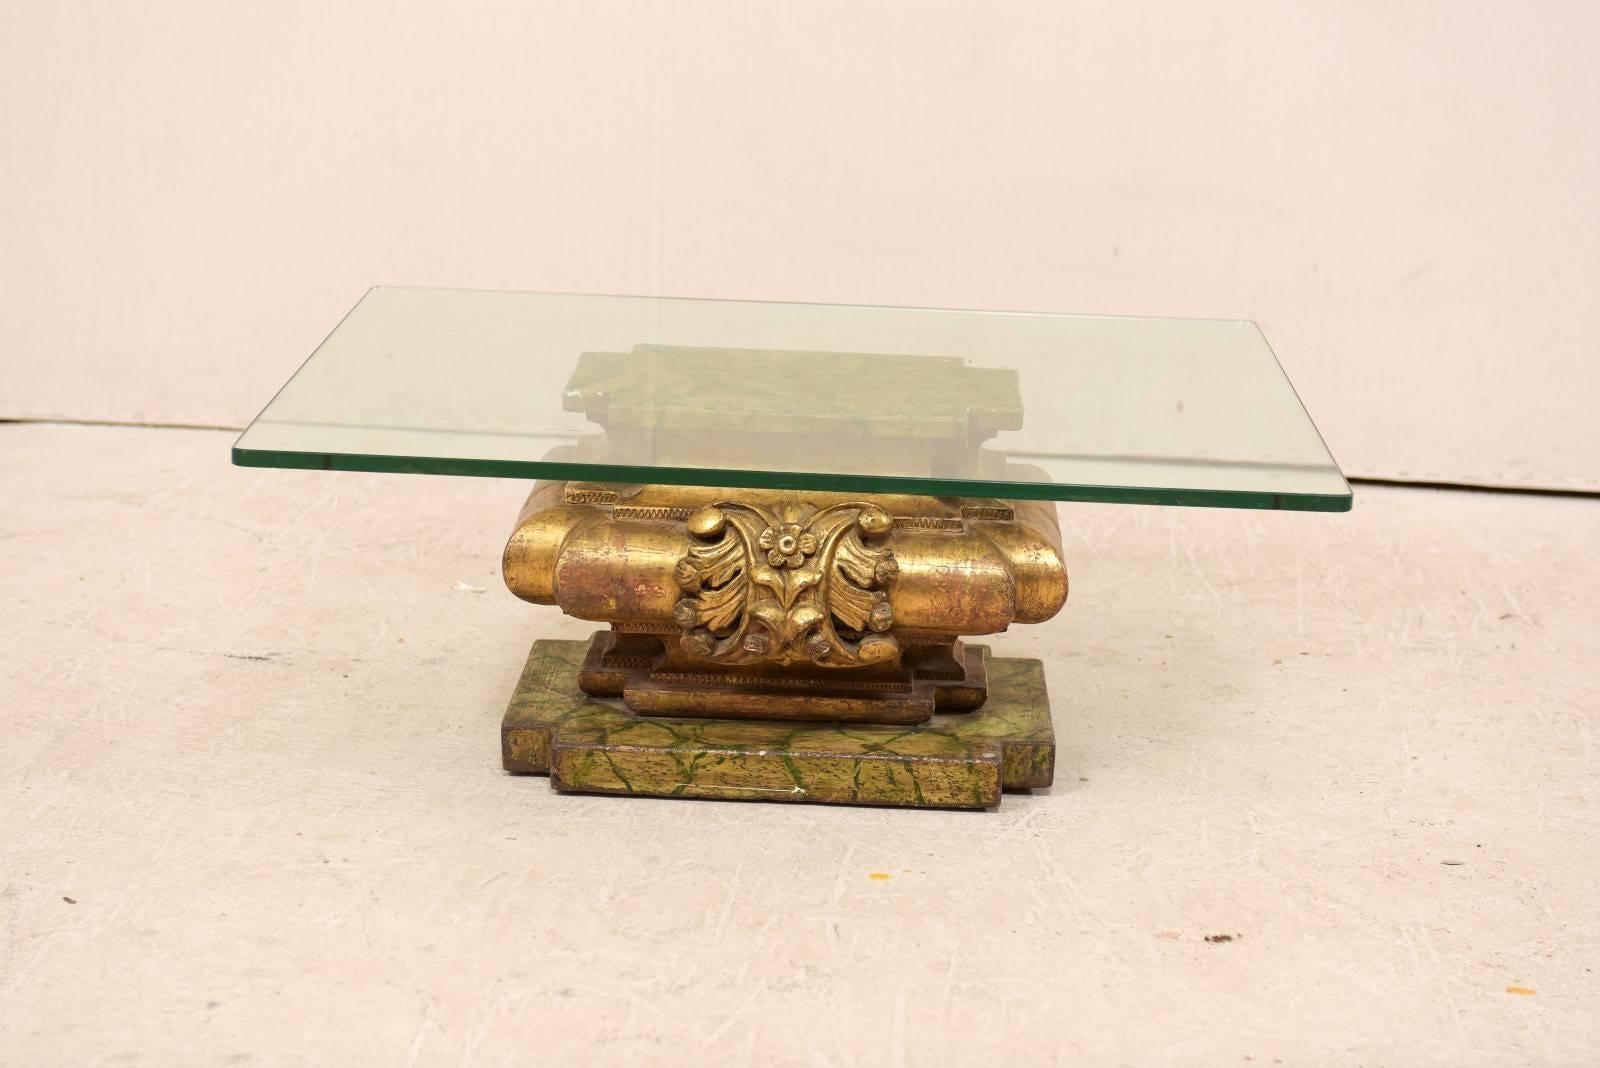 An Italian 19th century carved and giltwood coffee table with glass top. This luxurious little coffee table has been fashioned from an antique Italian giltwood fragment, carved with acanthus leaf and floral motif at each side, and topped with a